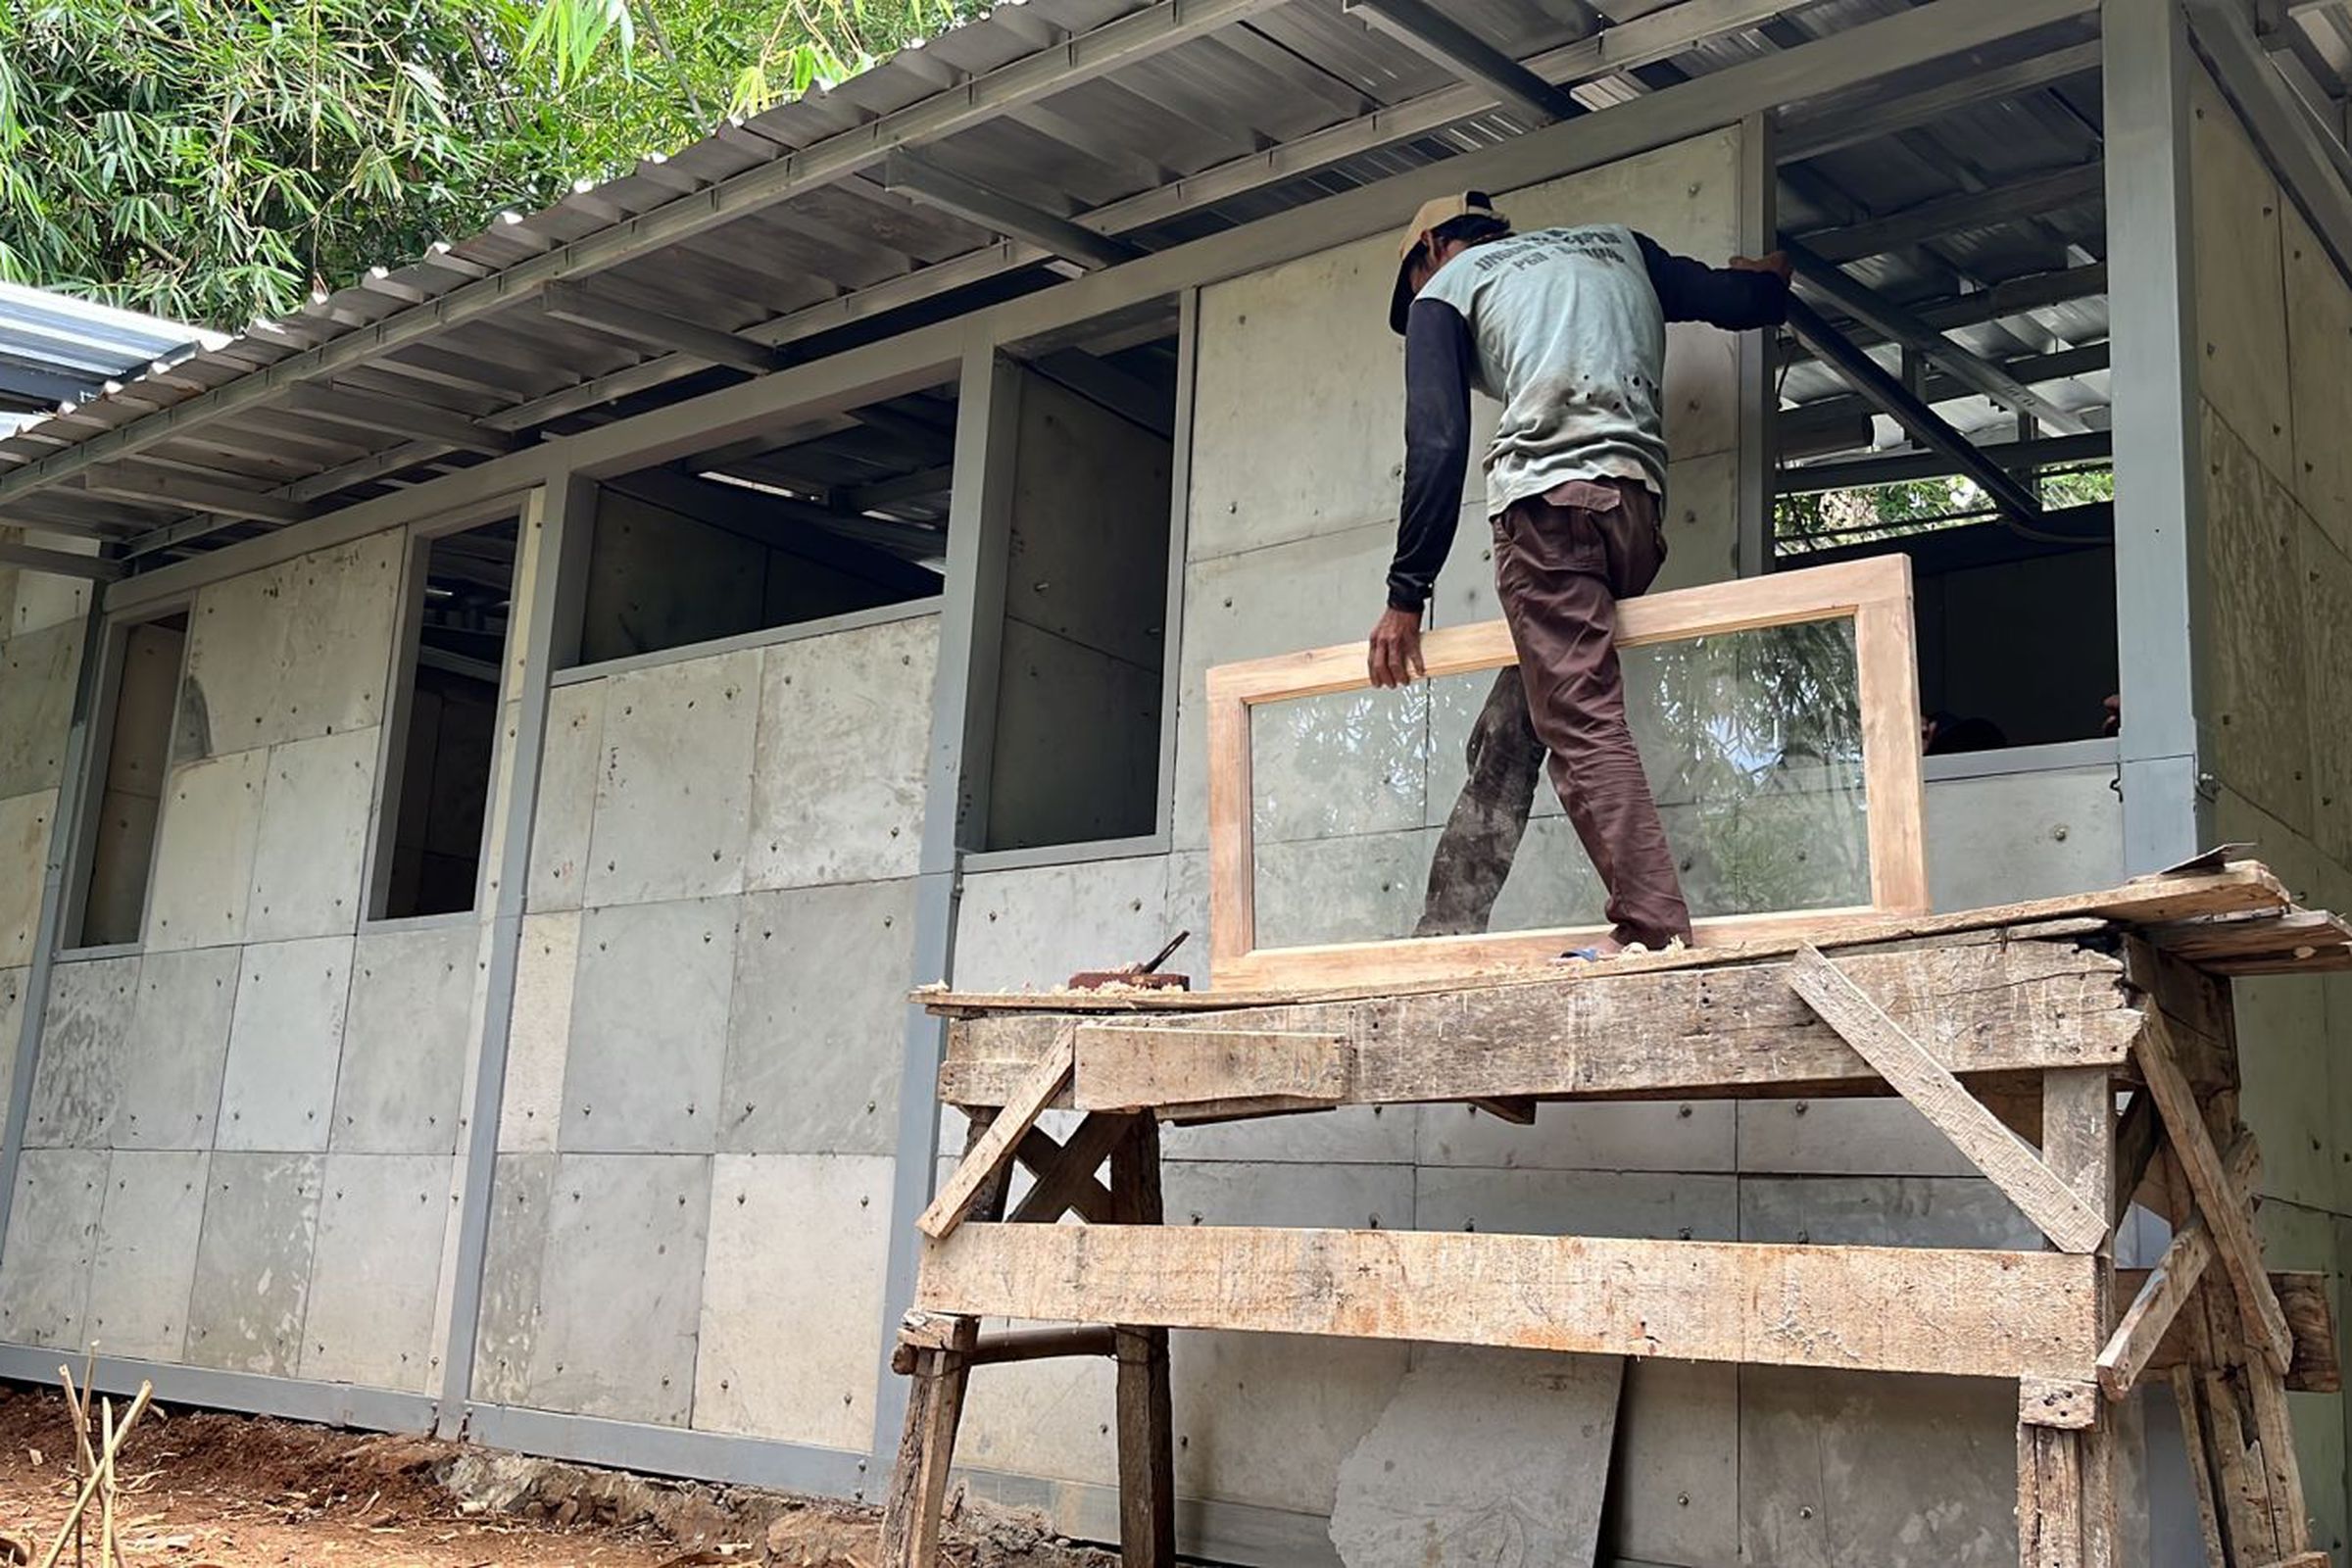 A person stands on a platform next to a small house under construction.